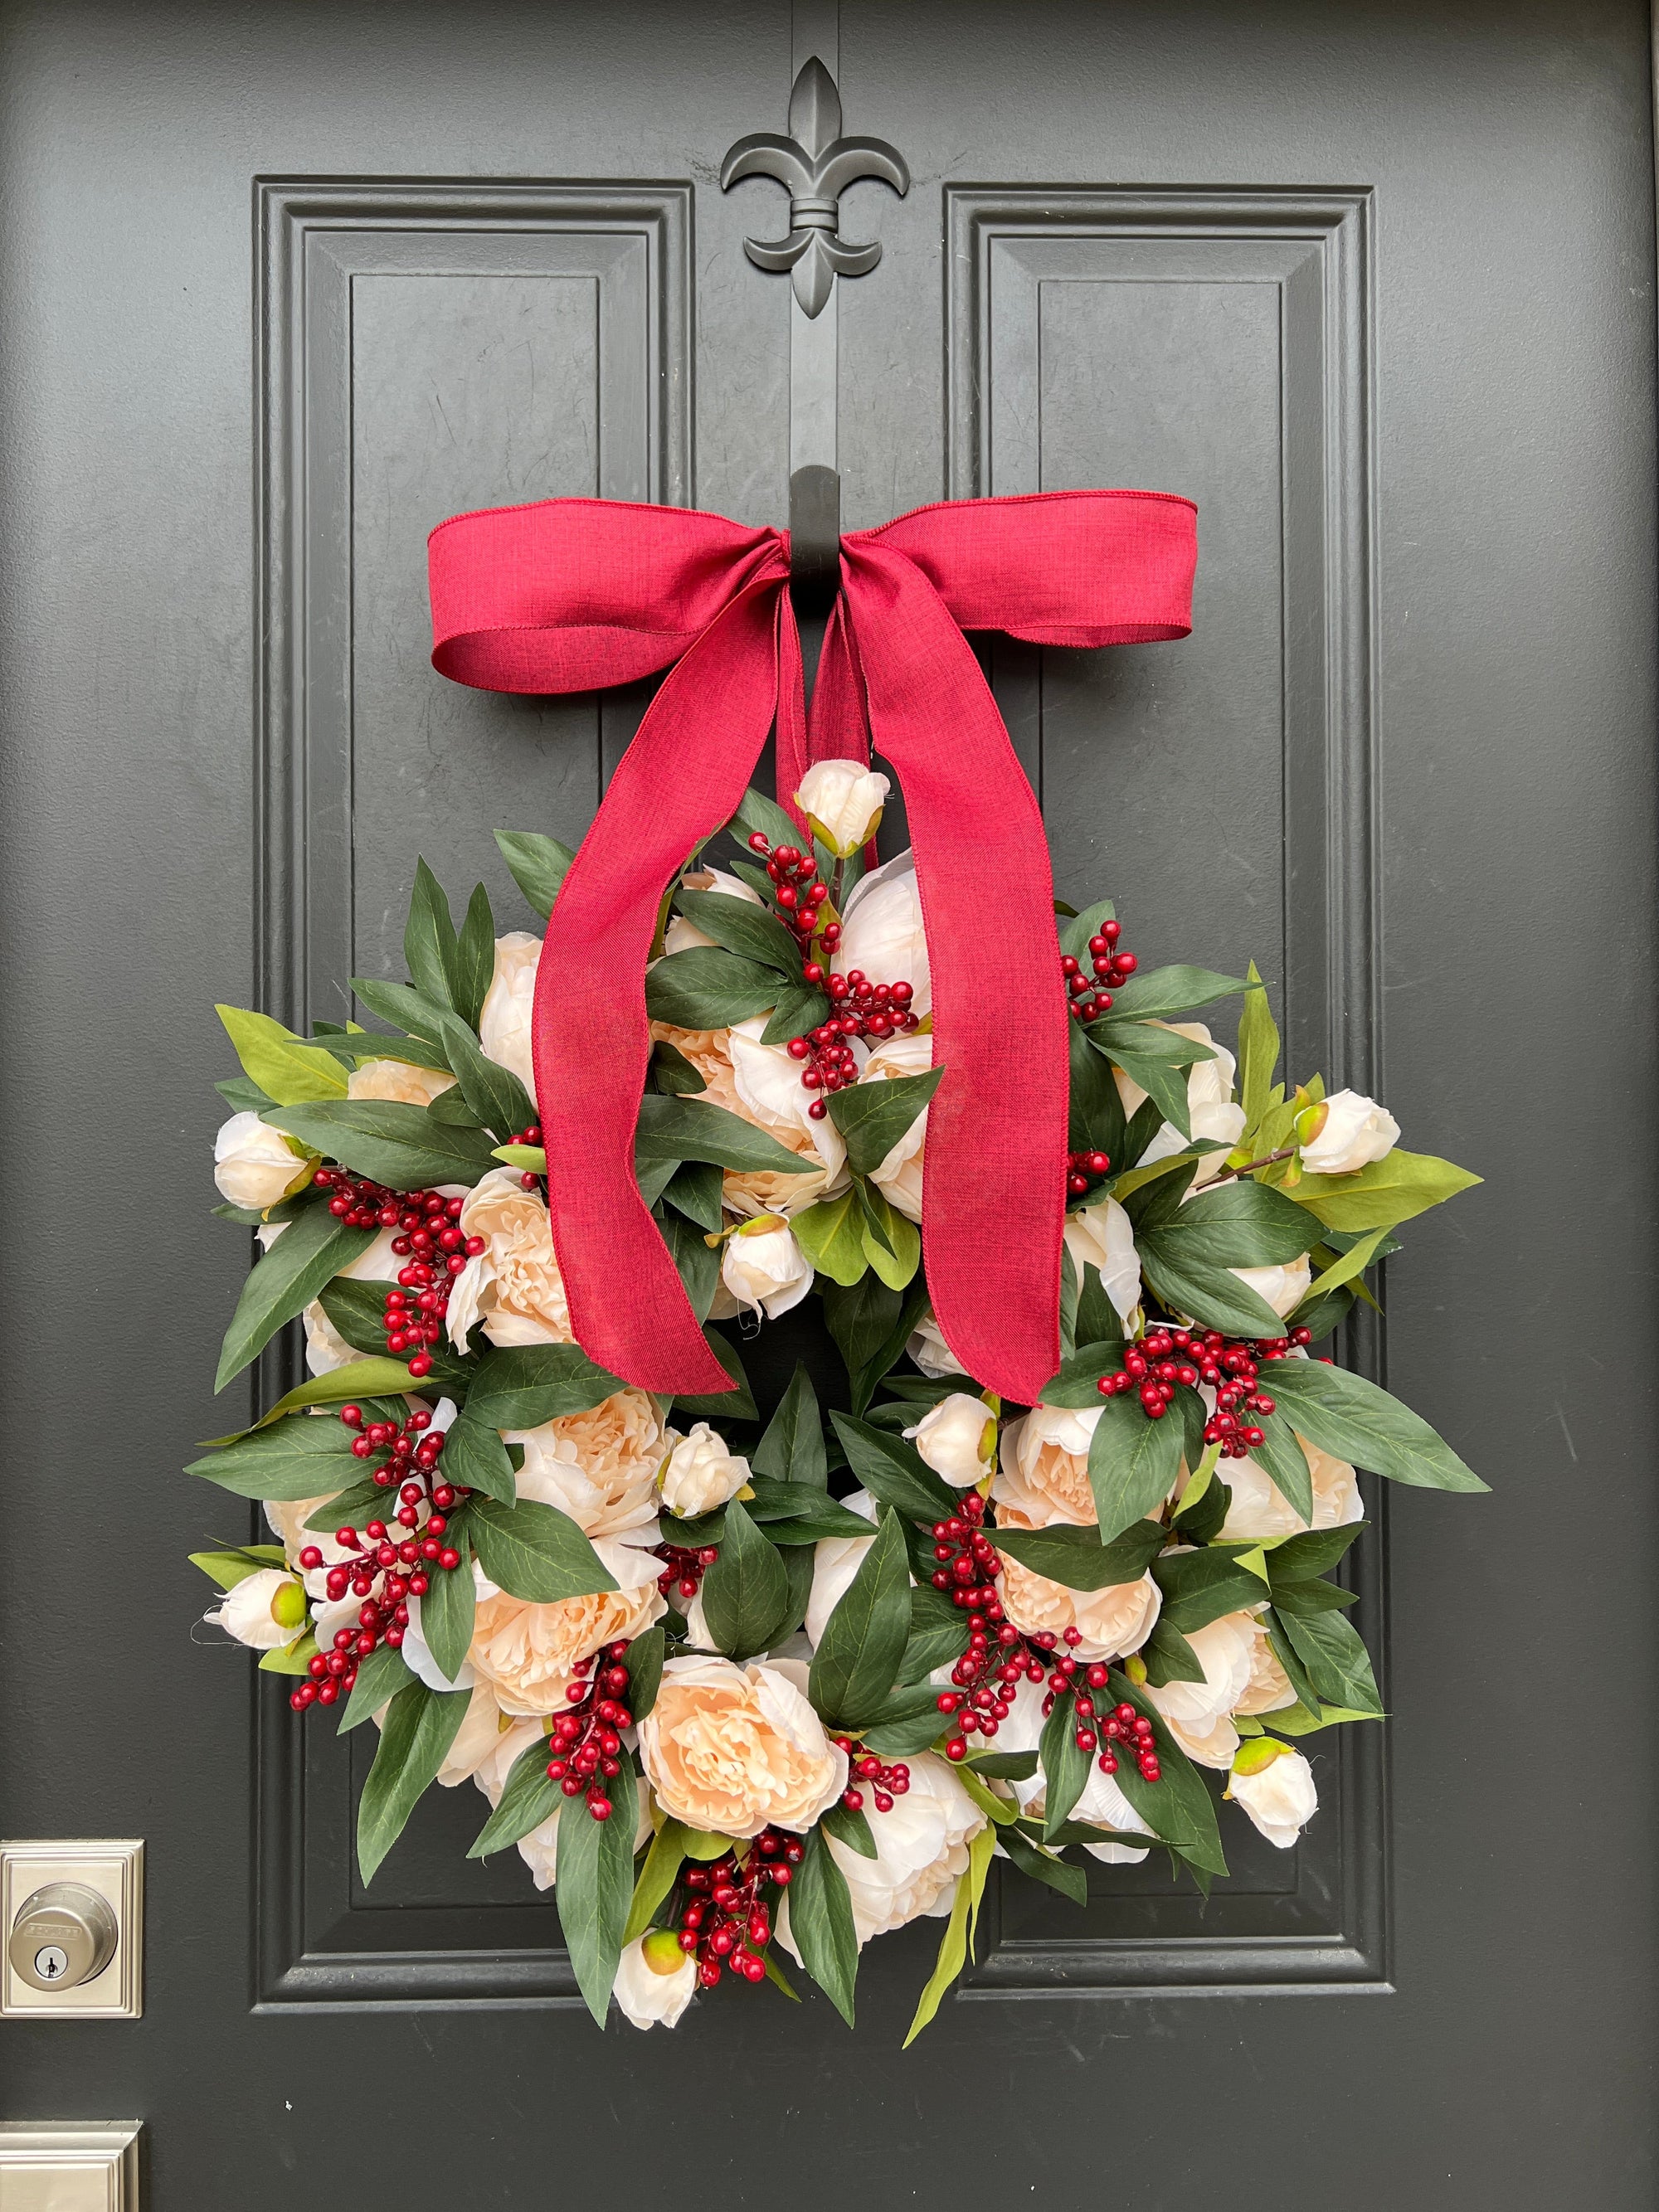 Classic Holiday Wreath, Cream Peony with Red Berry Wreaths - Ready to Ship